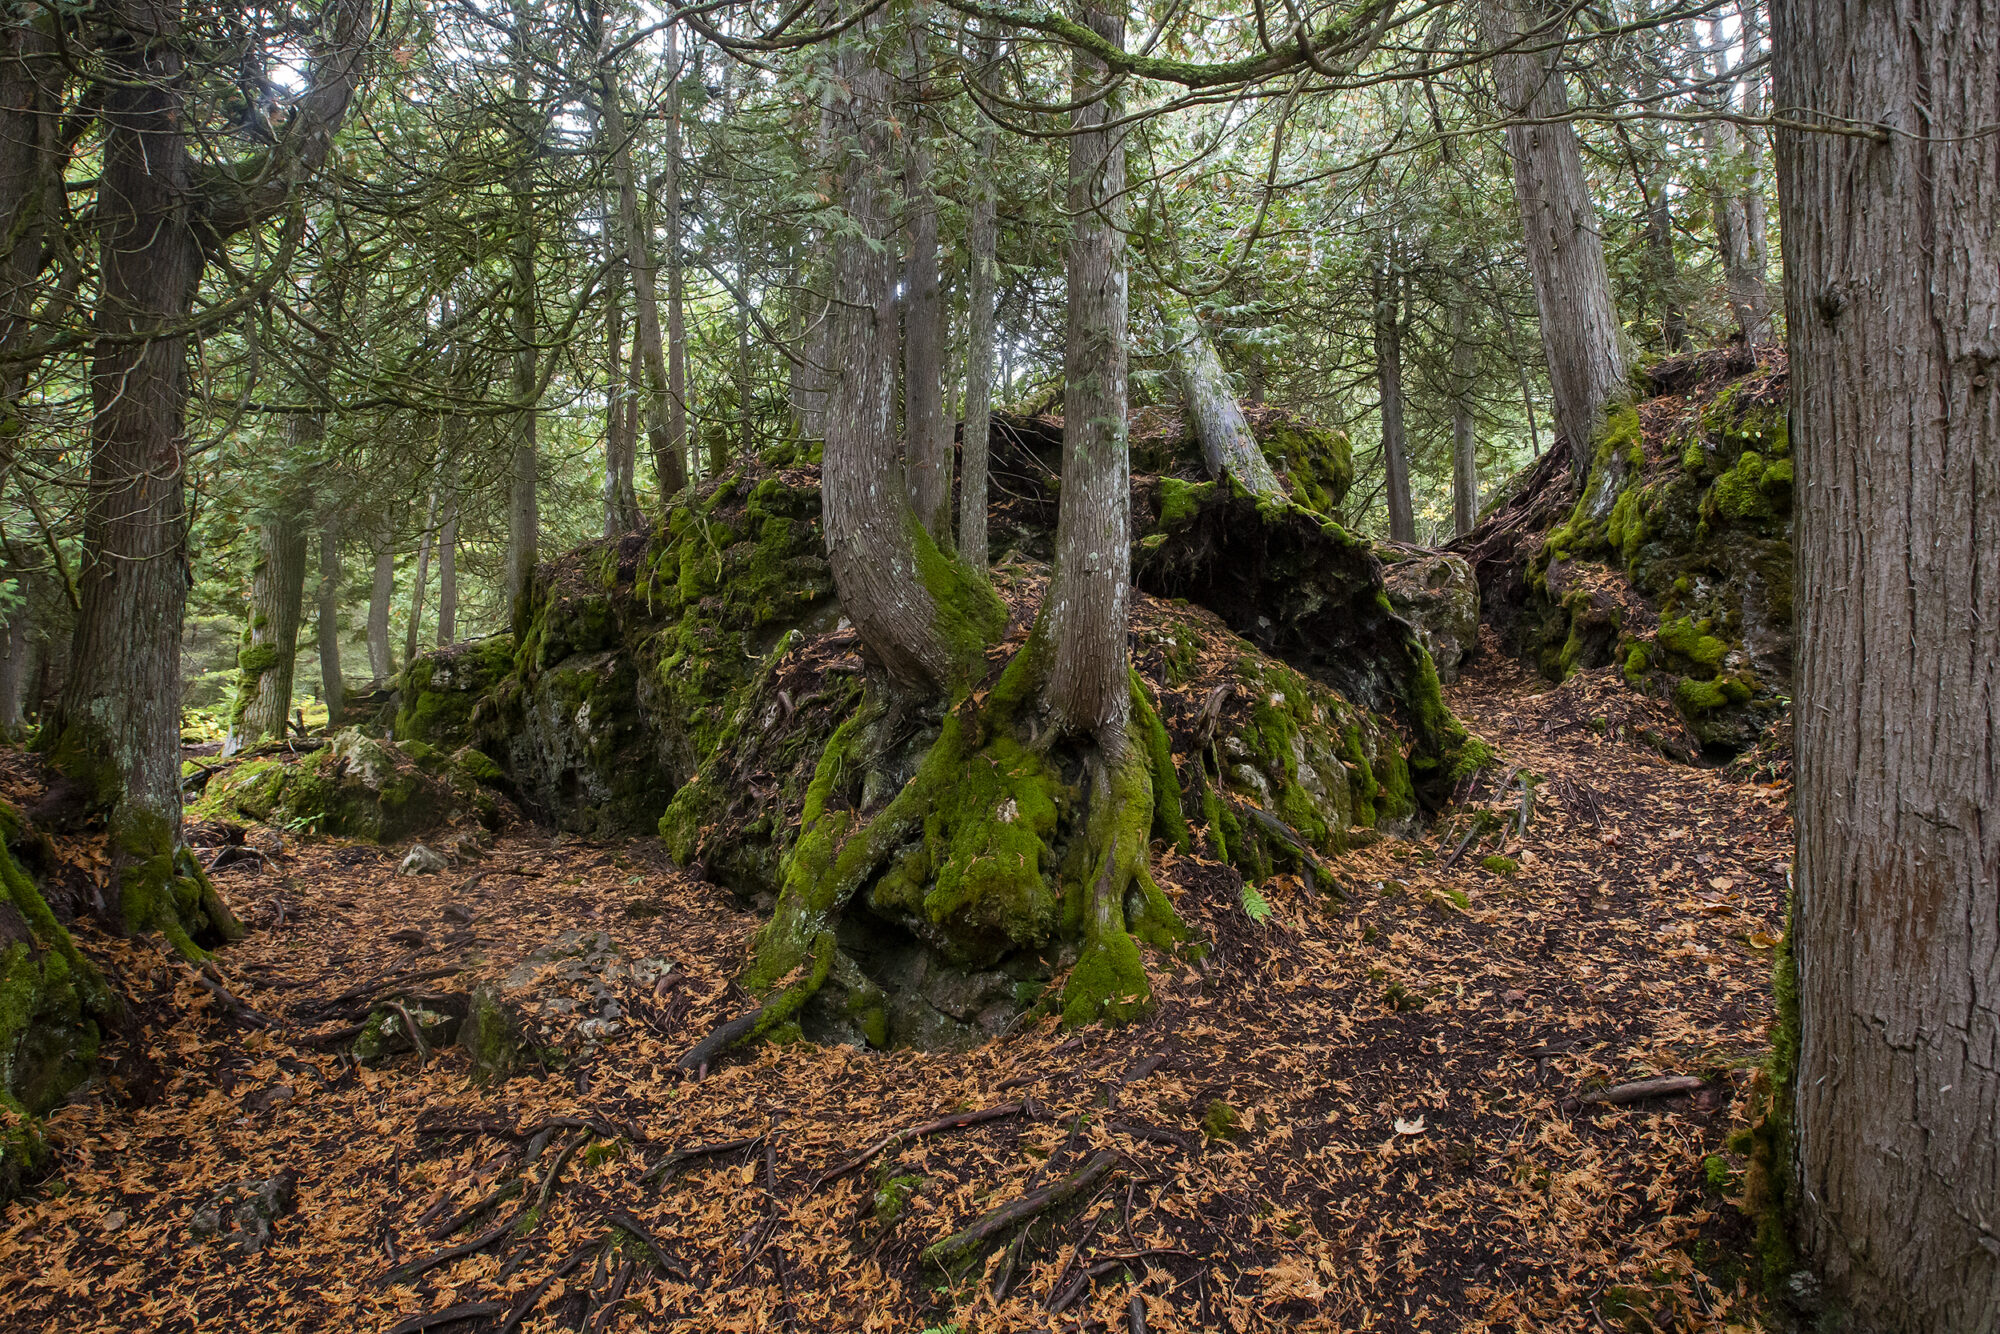 Large mossy rock with tree growing out of it next to a trail